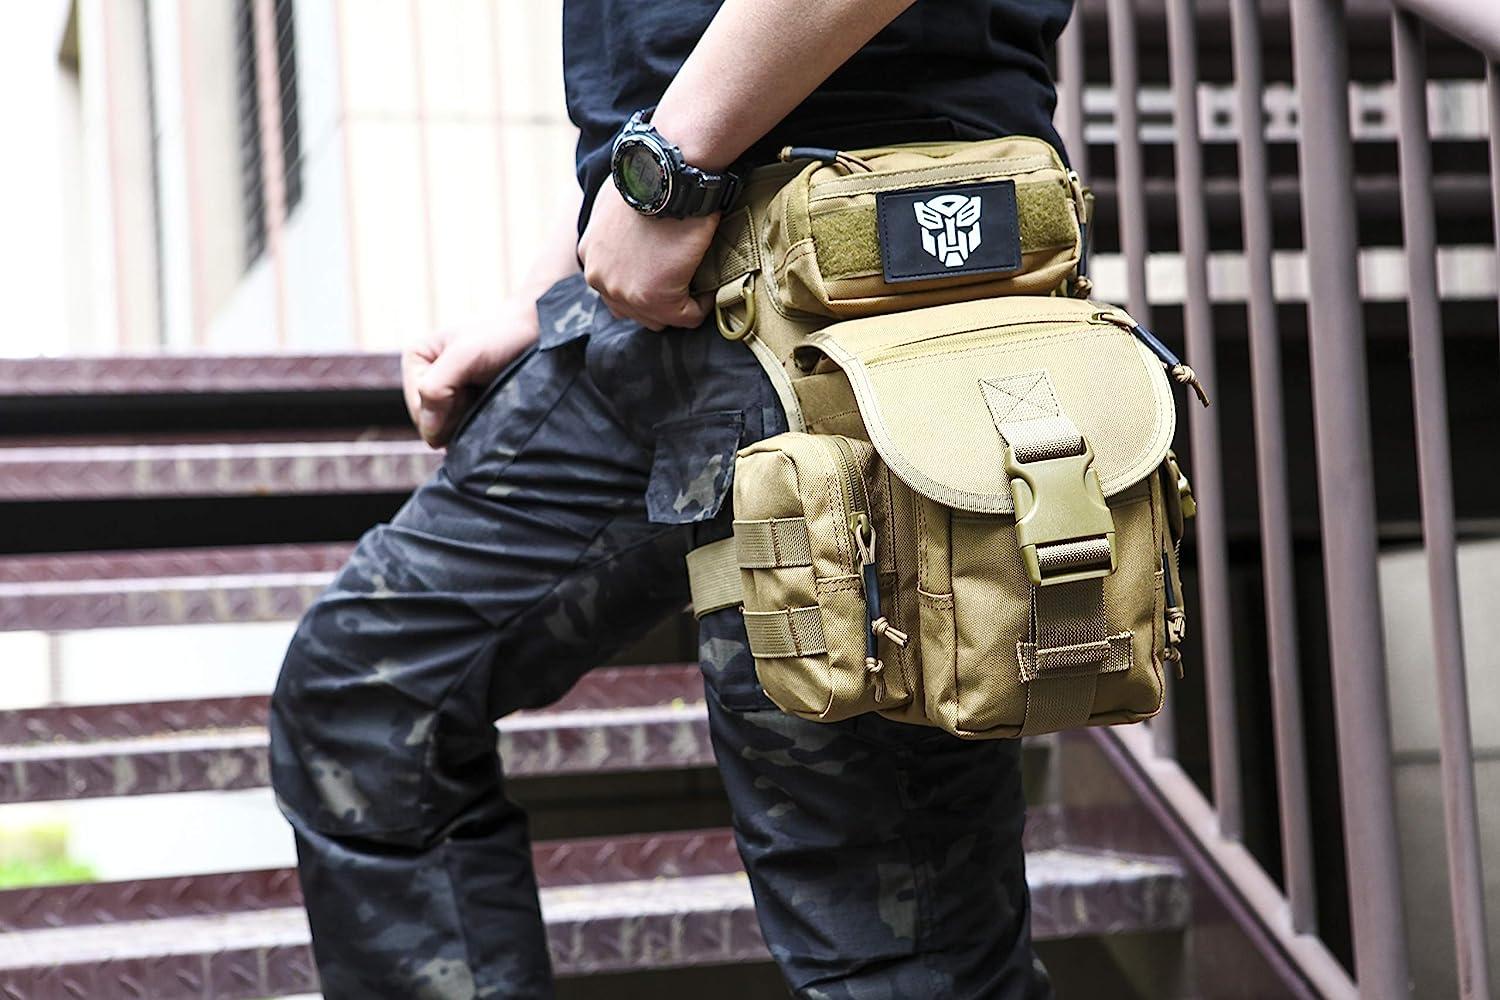 Drop Leg Bag for Men Military Tactical Thigh Pack Pouch